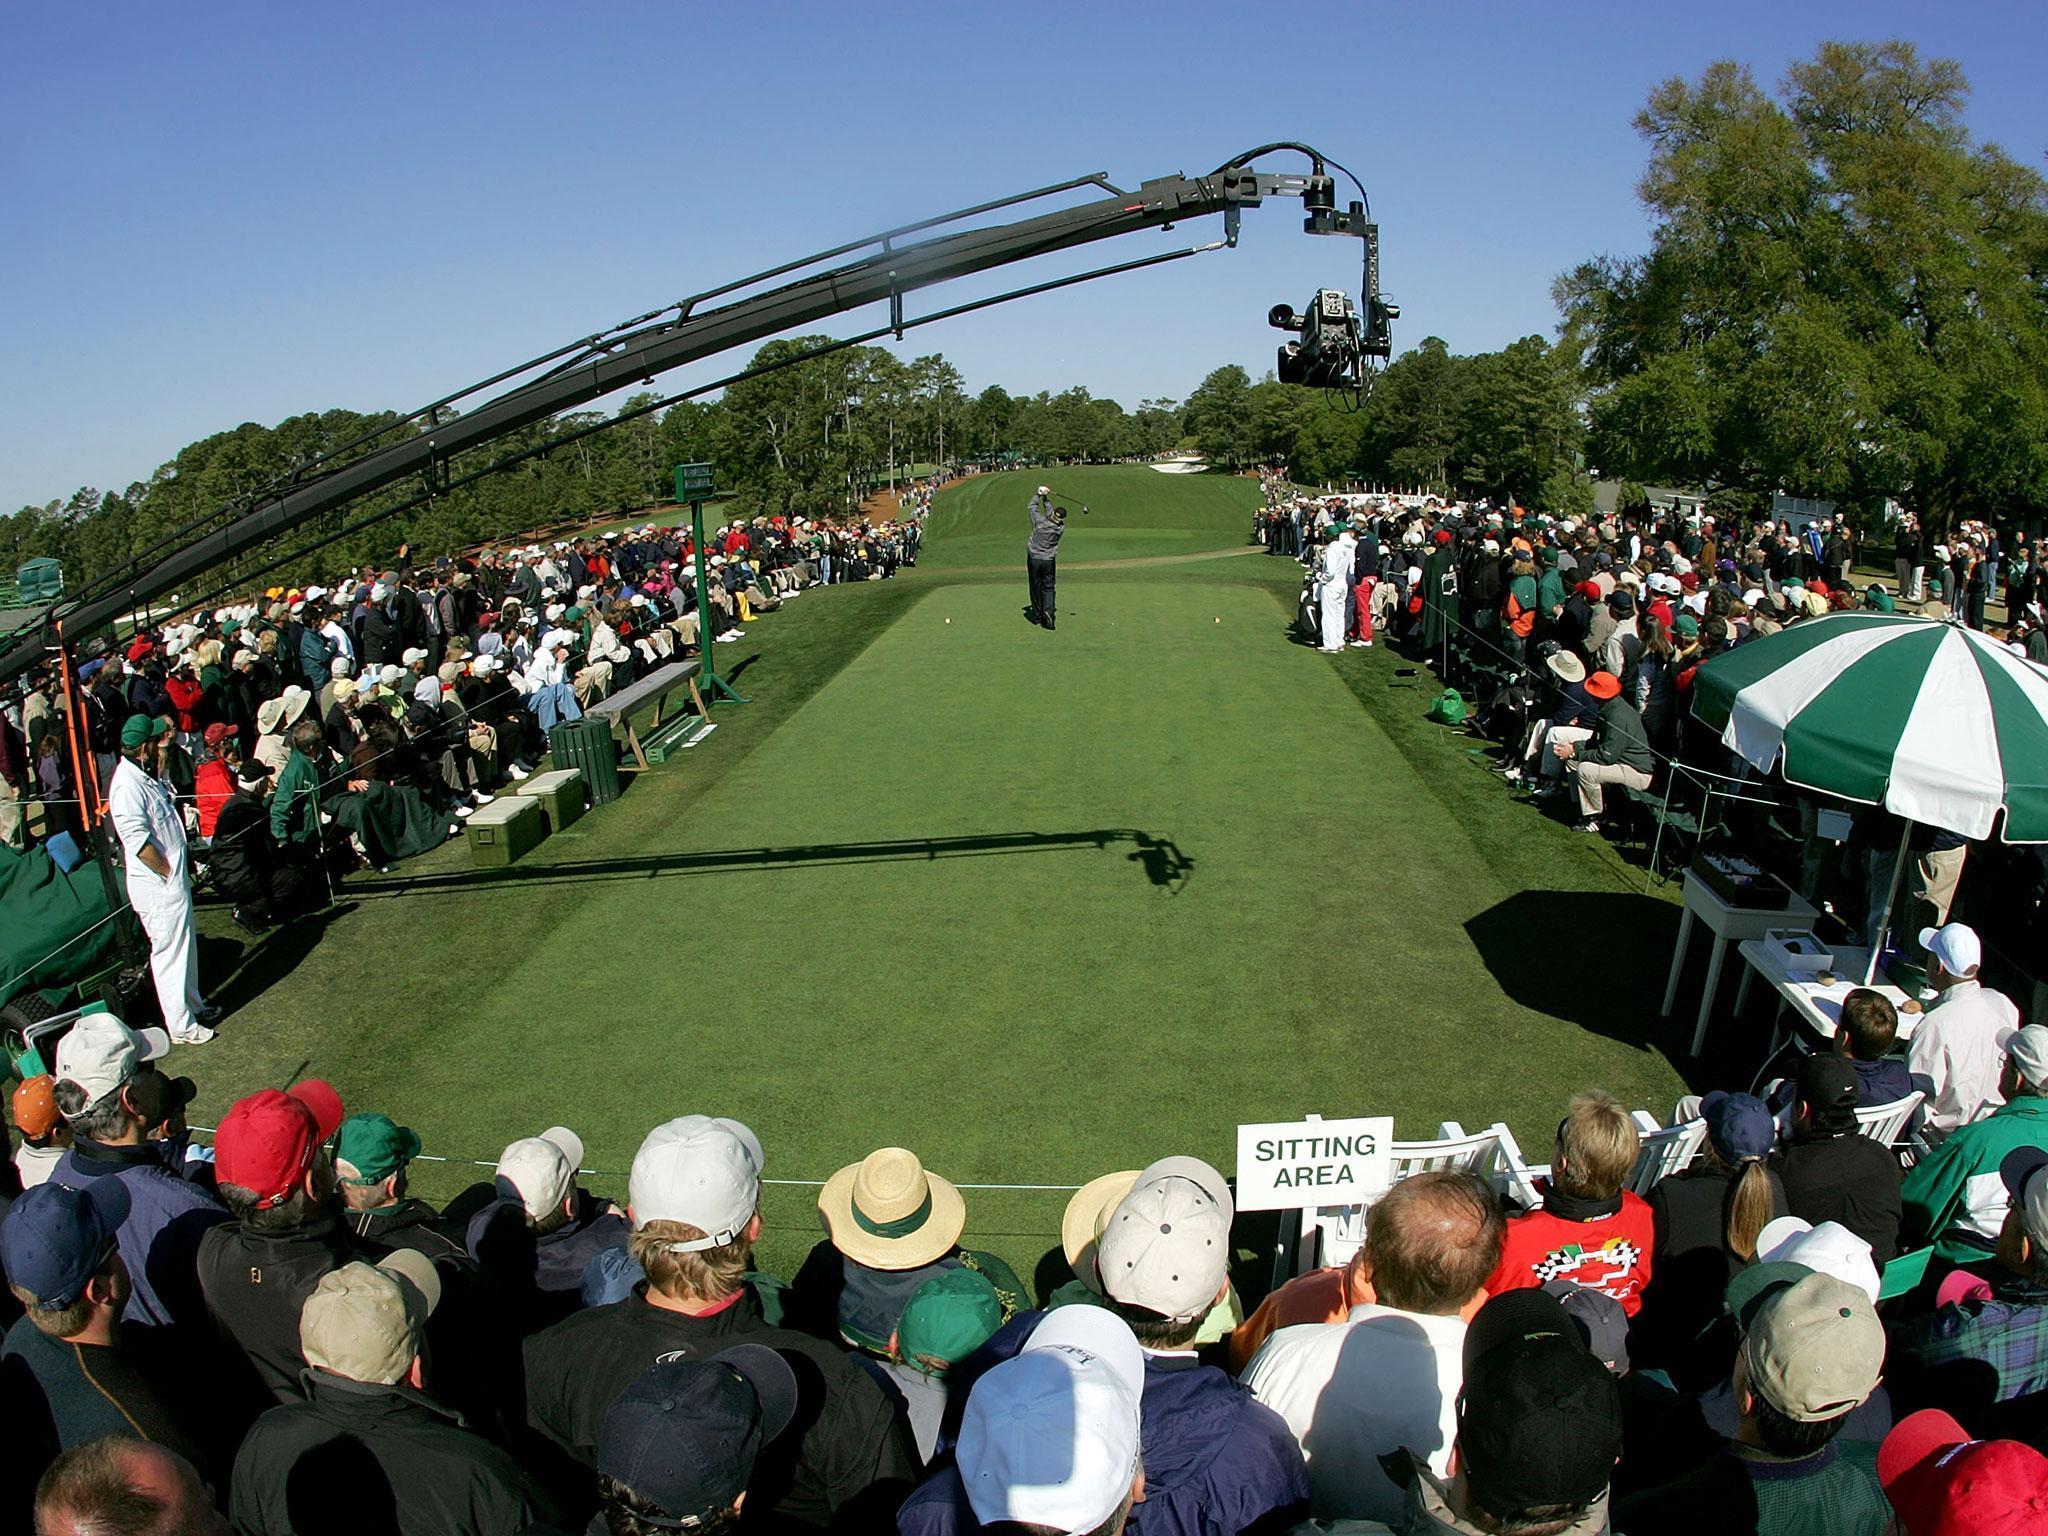 No one wants to launch the first tee shot into the pine needles in front of the crowd